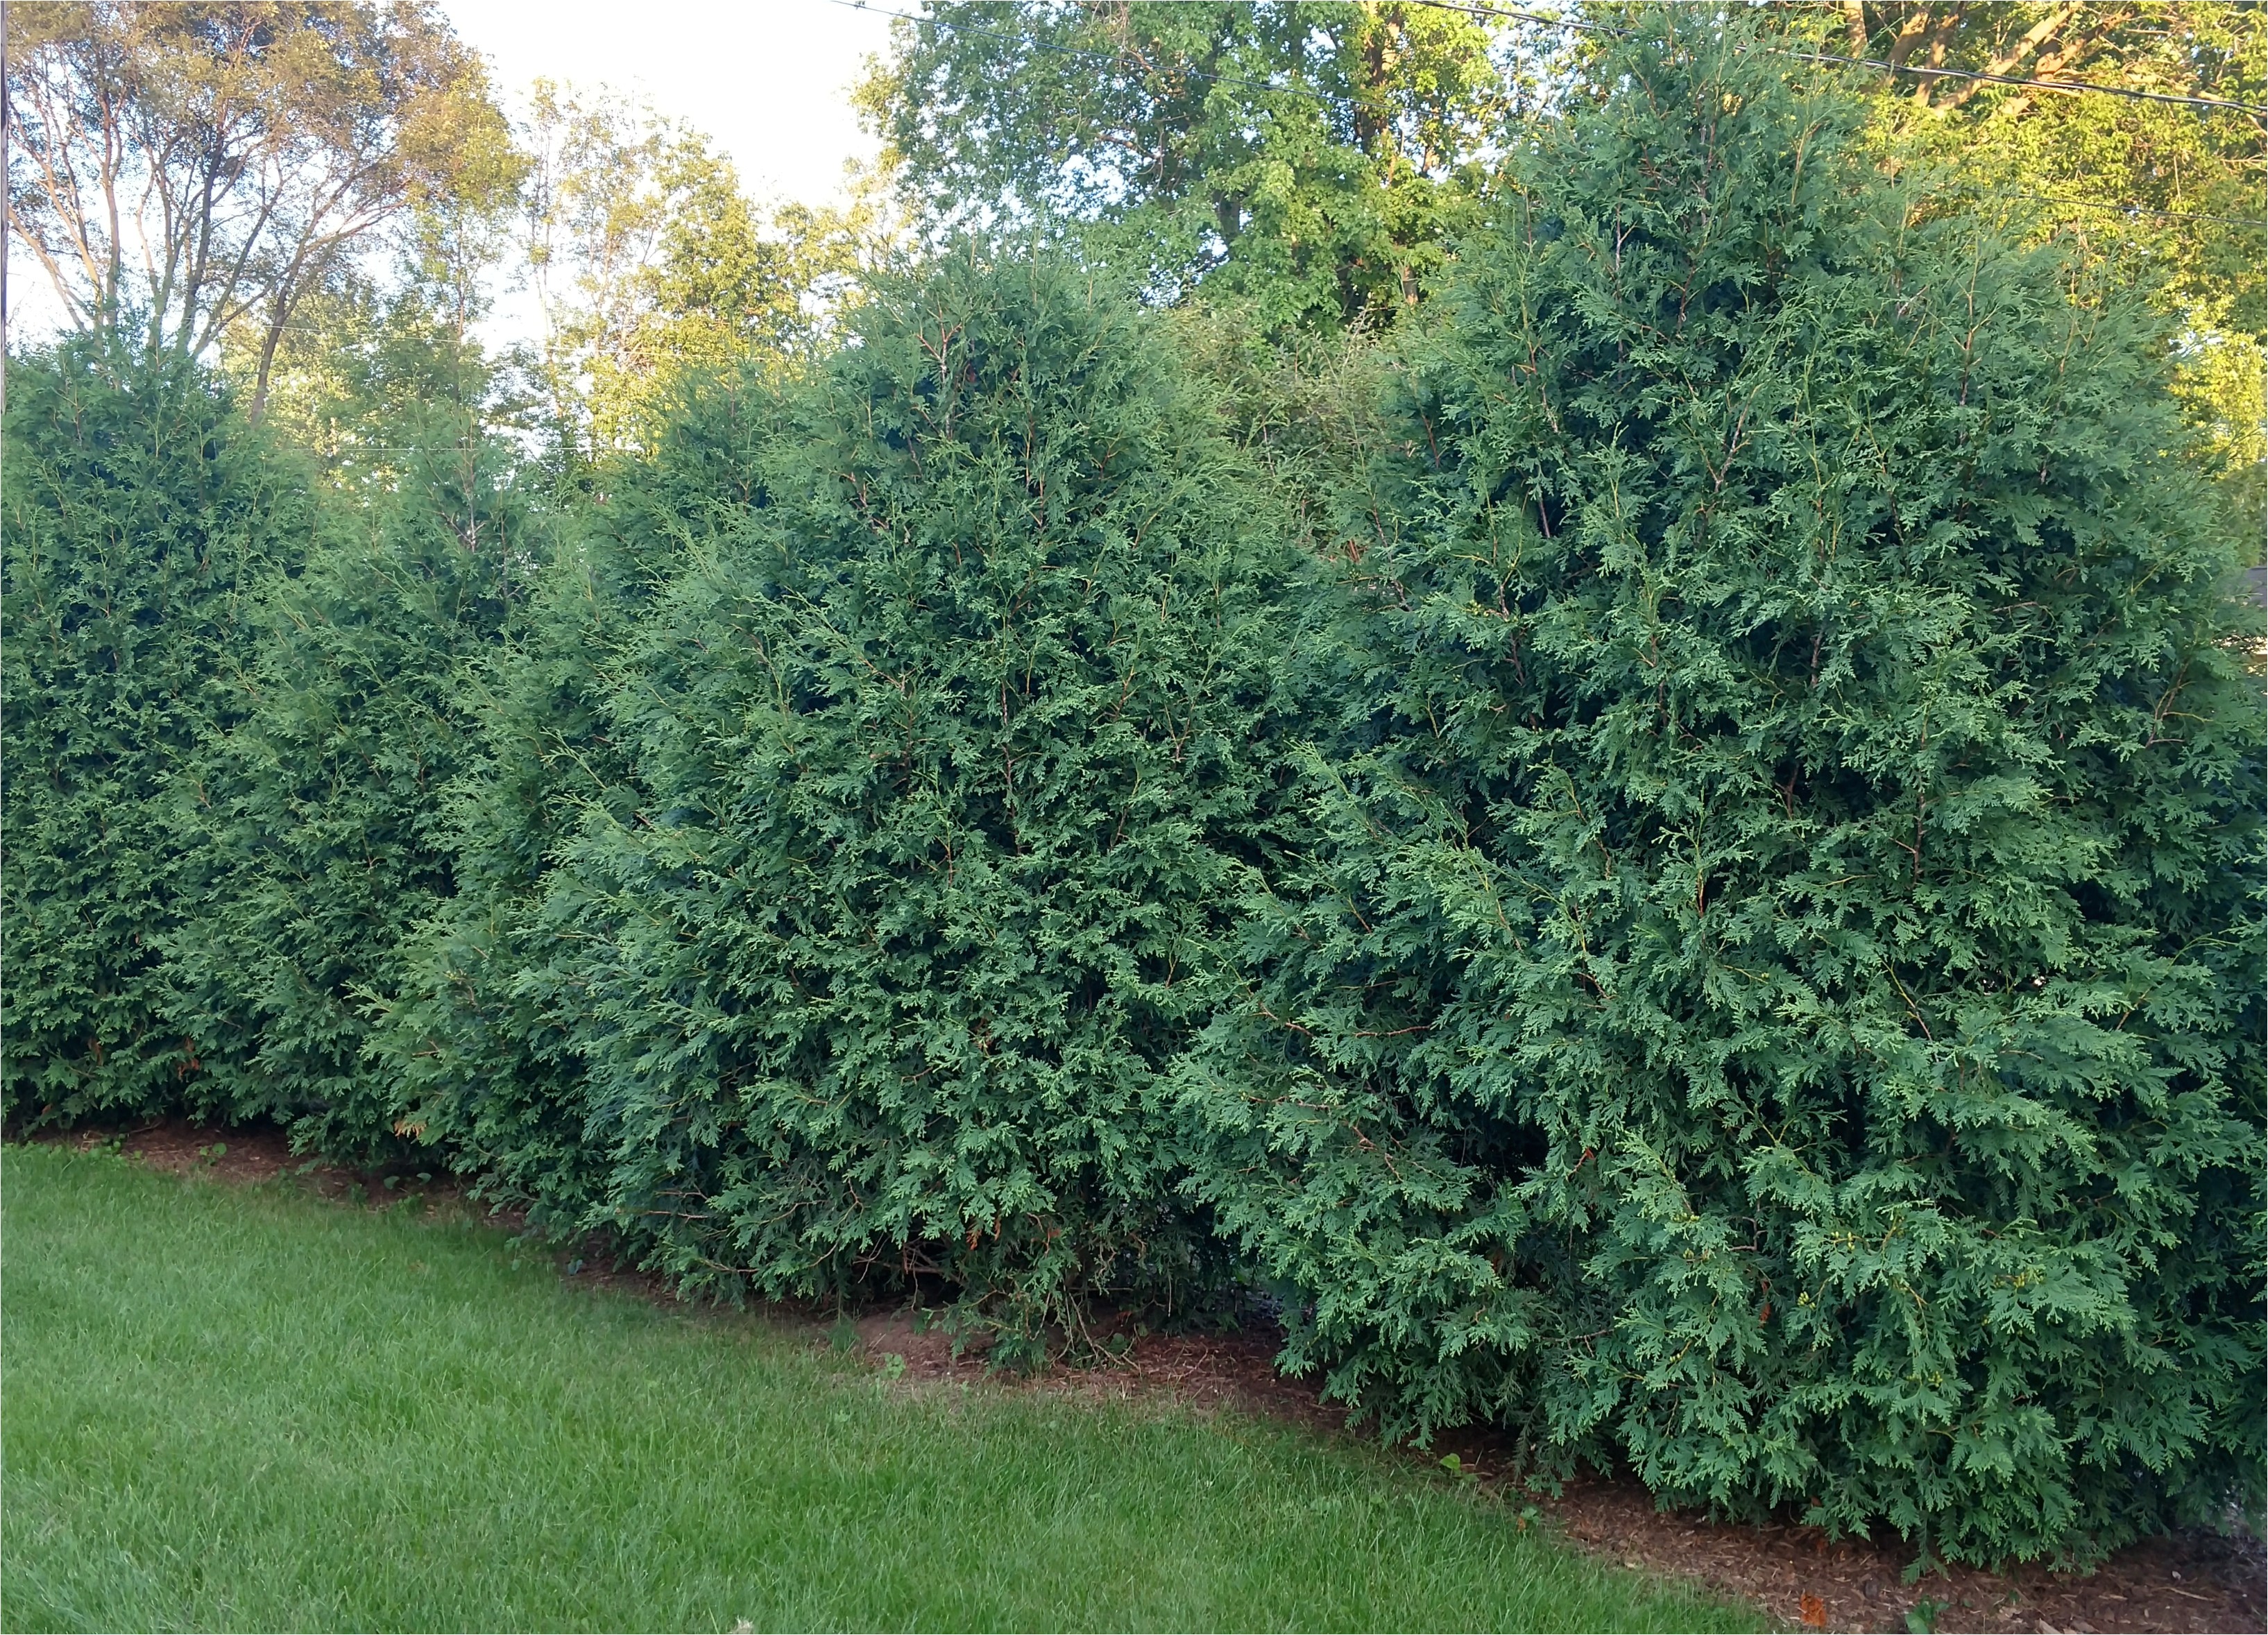 Techny Arborvitae for Sale Techny Arborvitae Seedlings Available for Sale at Chief River Nursery